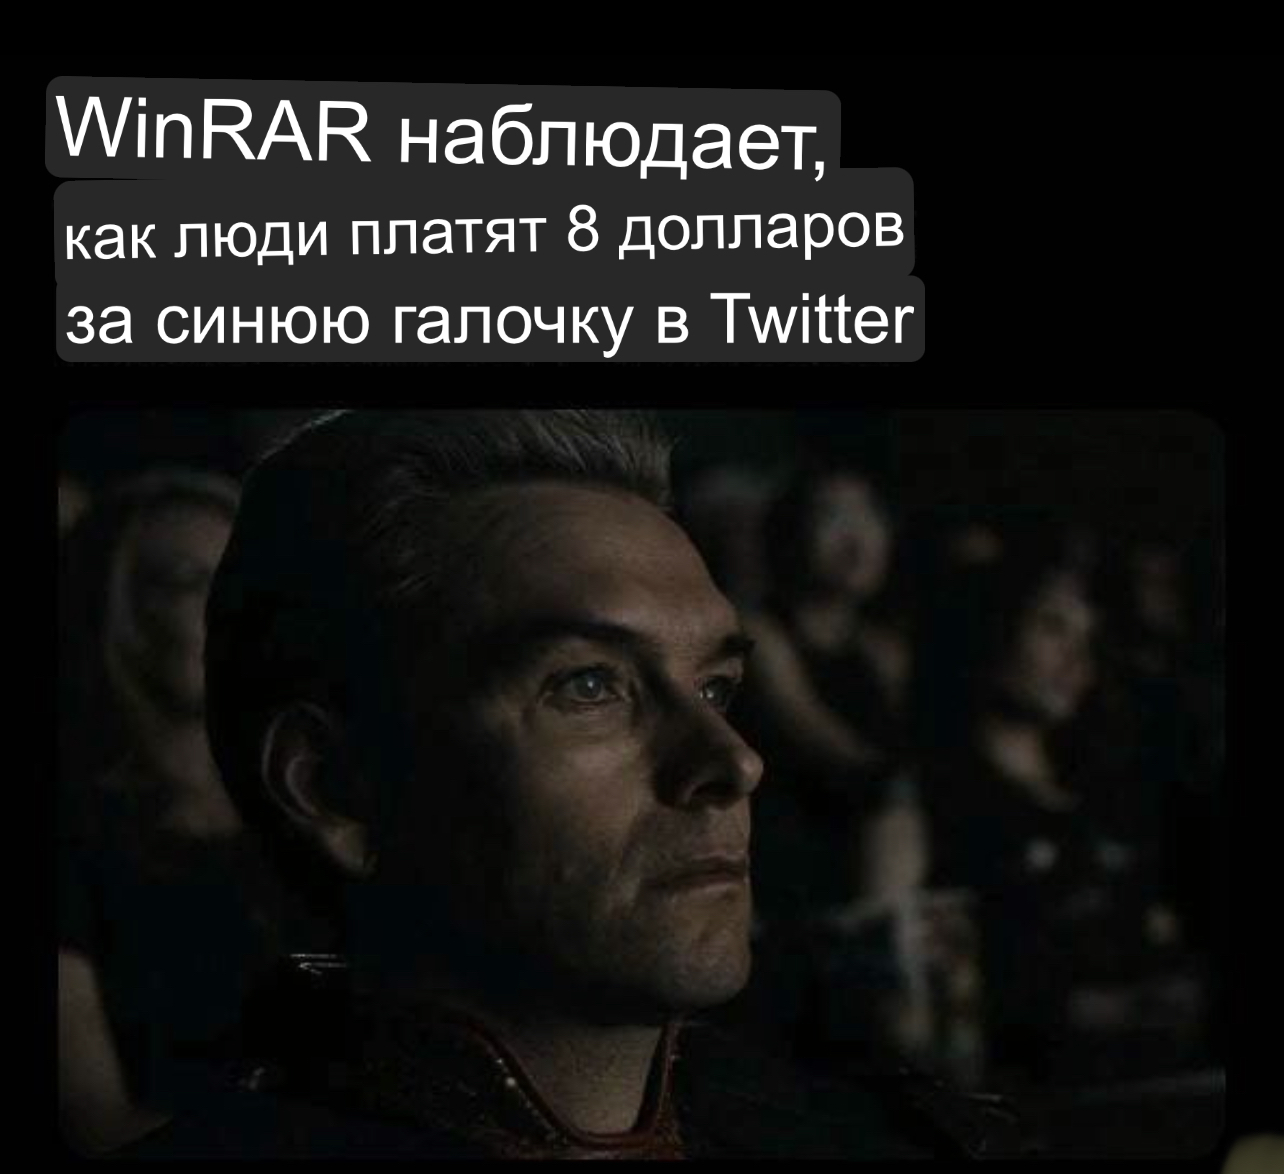 Who among us has never used, and who among us has paid - Winrar, Picture with text, Twitter, Repeat